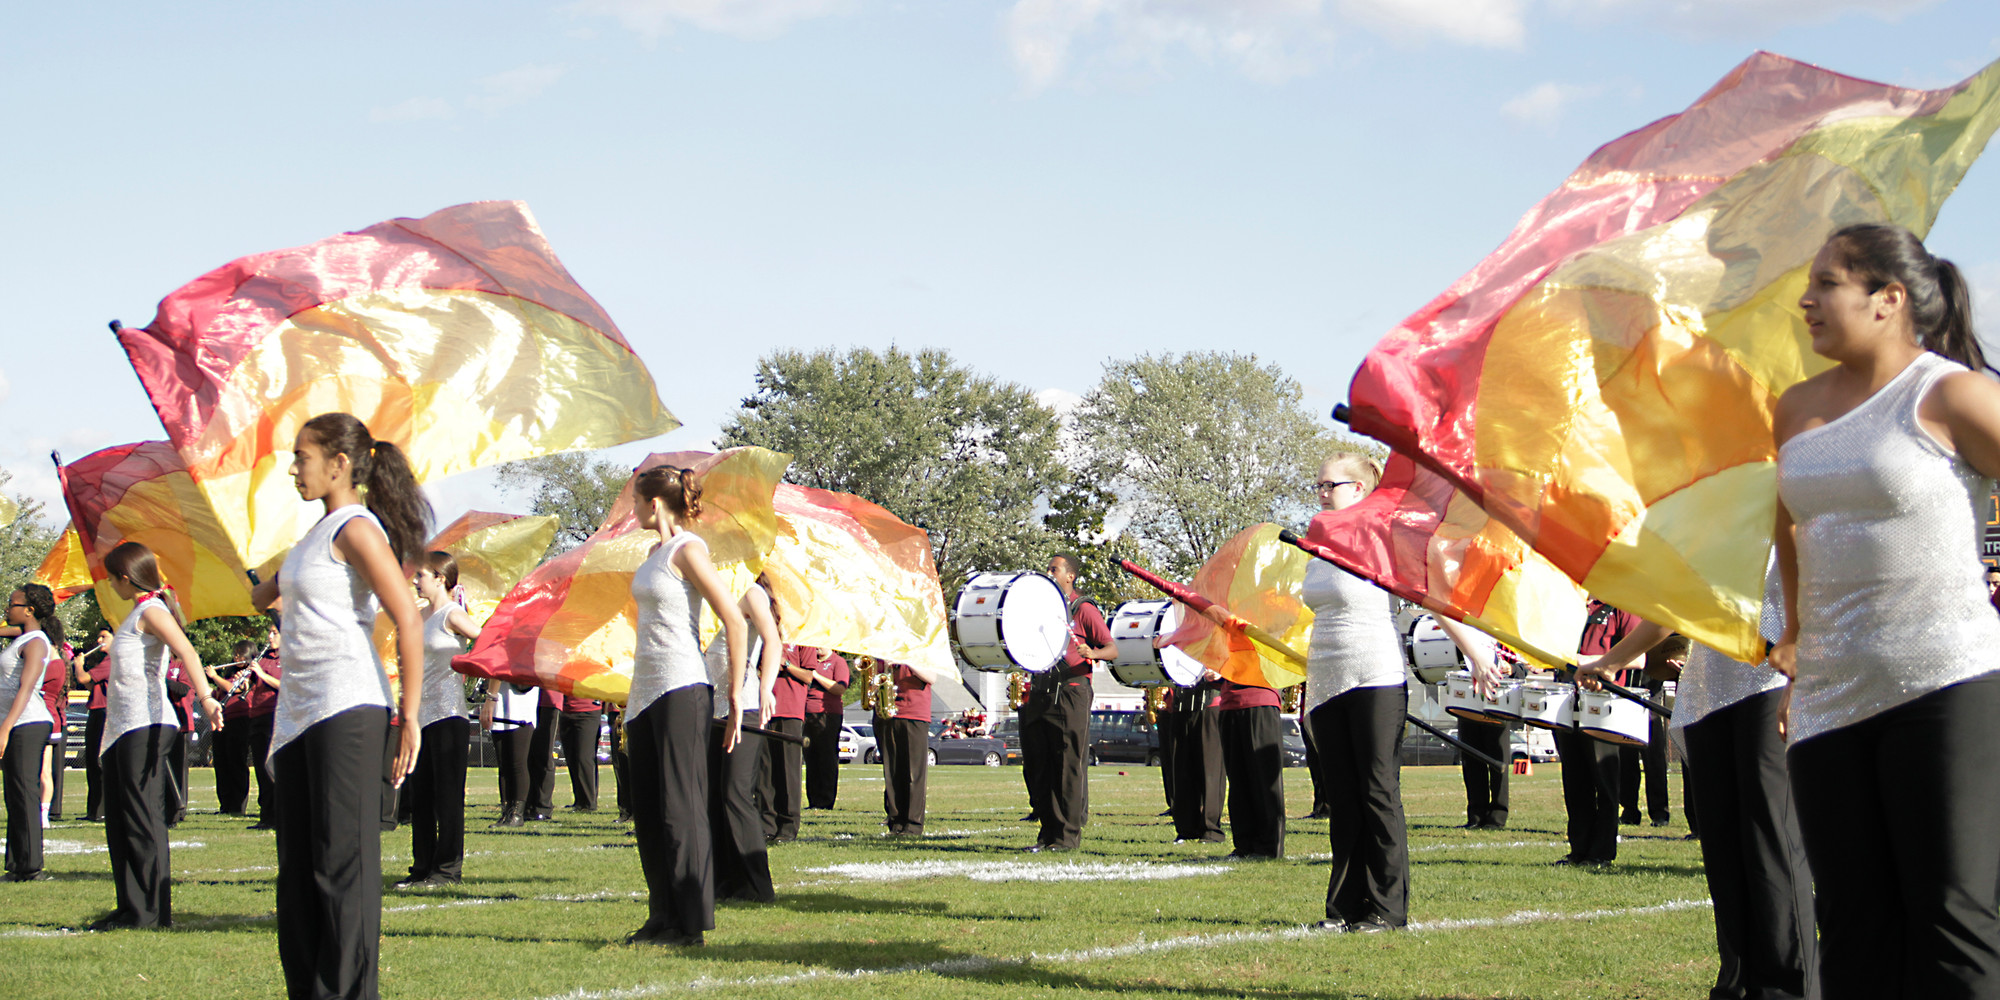 Photos by Sue Grieco/Herald
The color guard provided some impressive choreography during the halftime show at W.T. Clarke High School’s Homecoming Parade last Saturday.